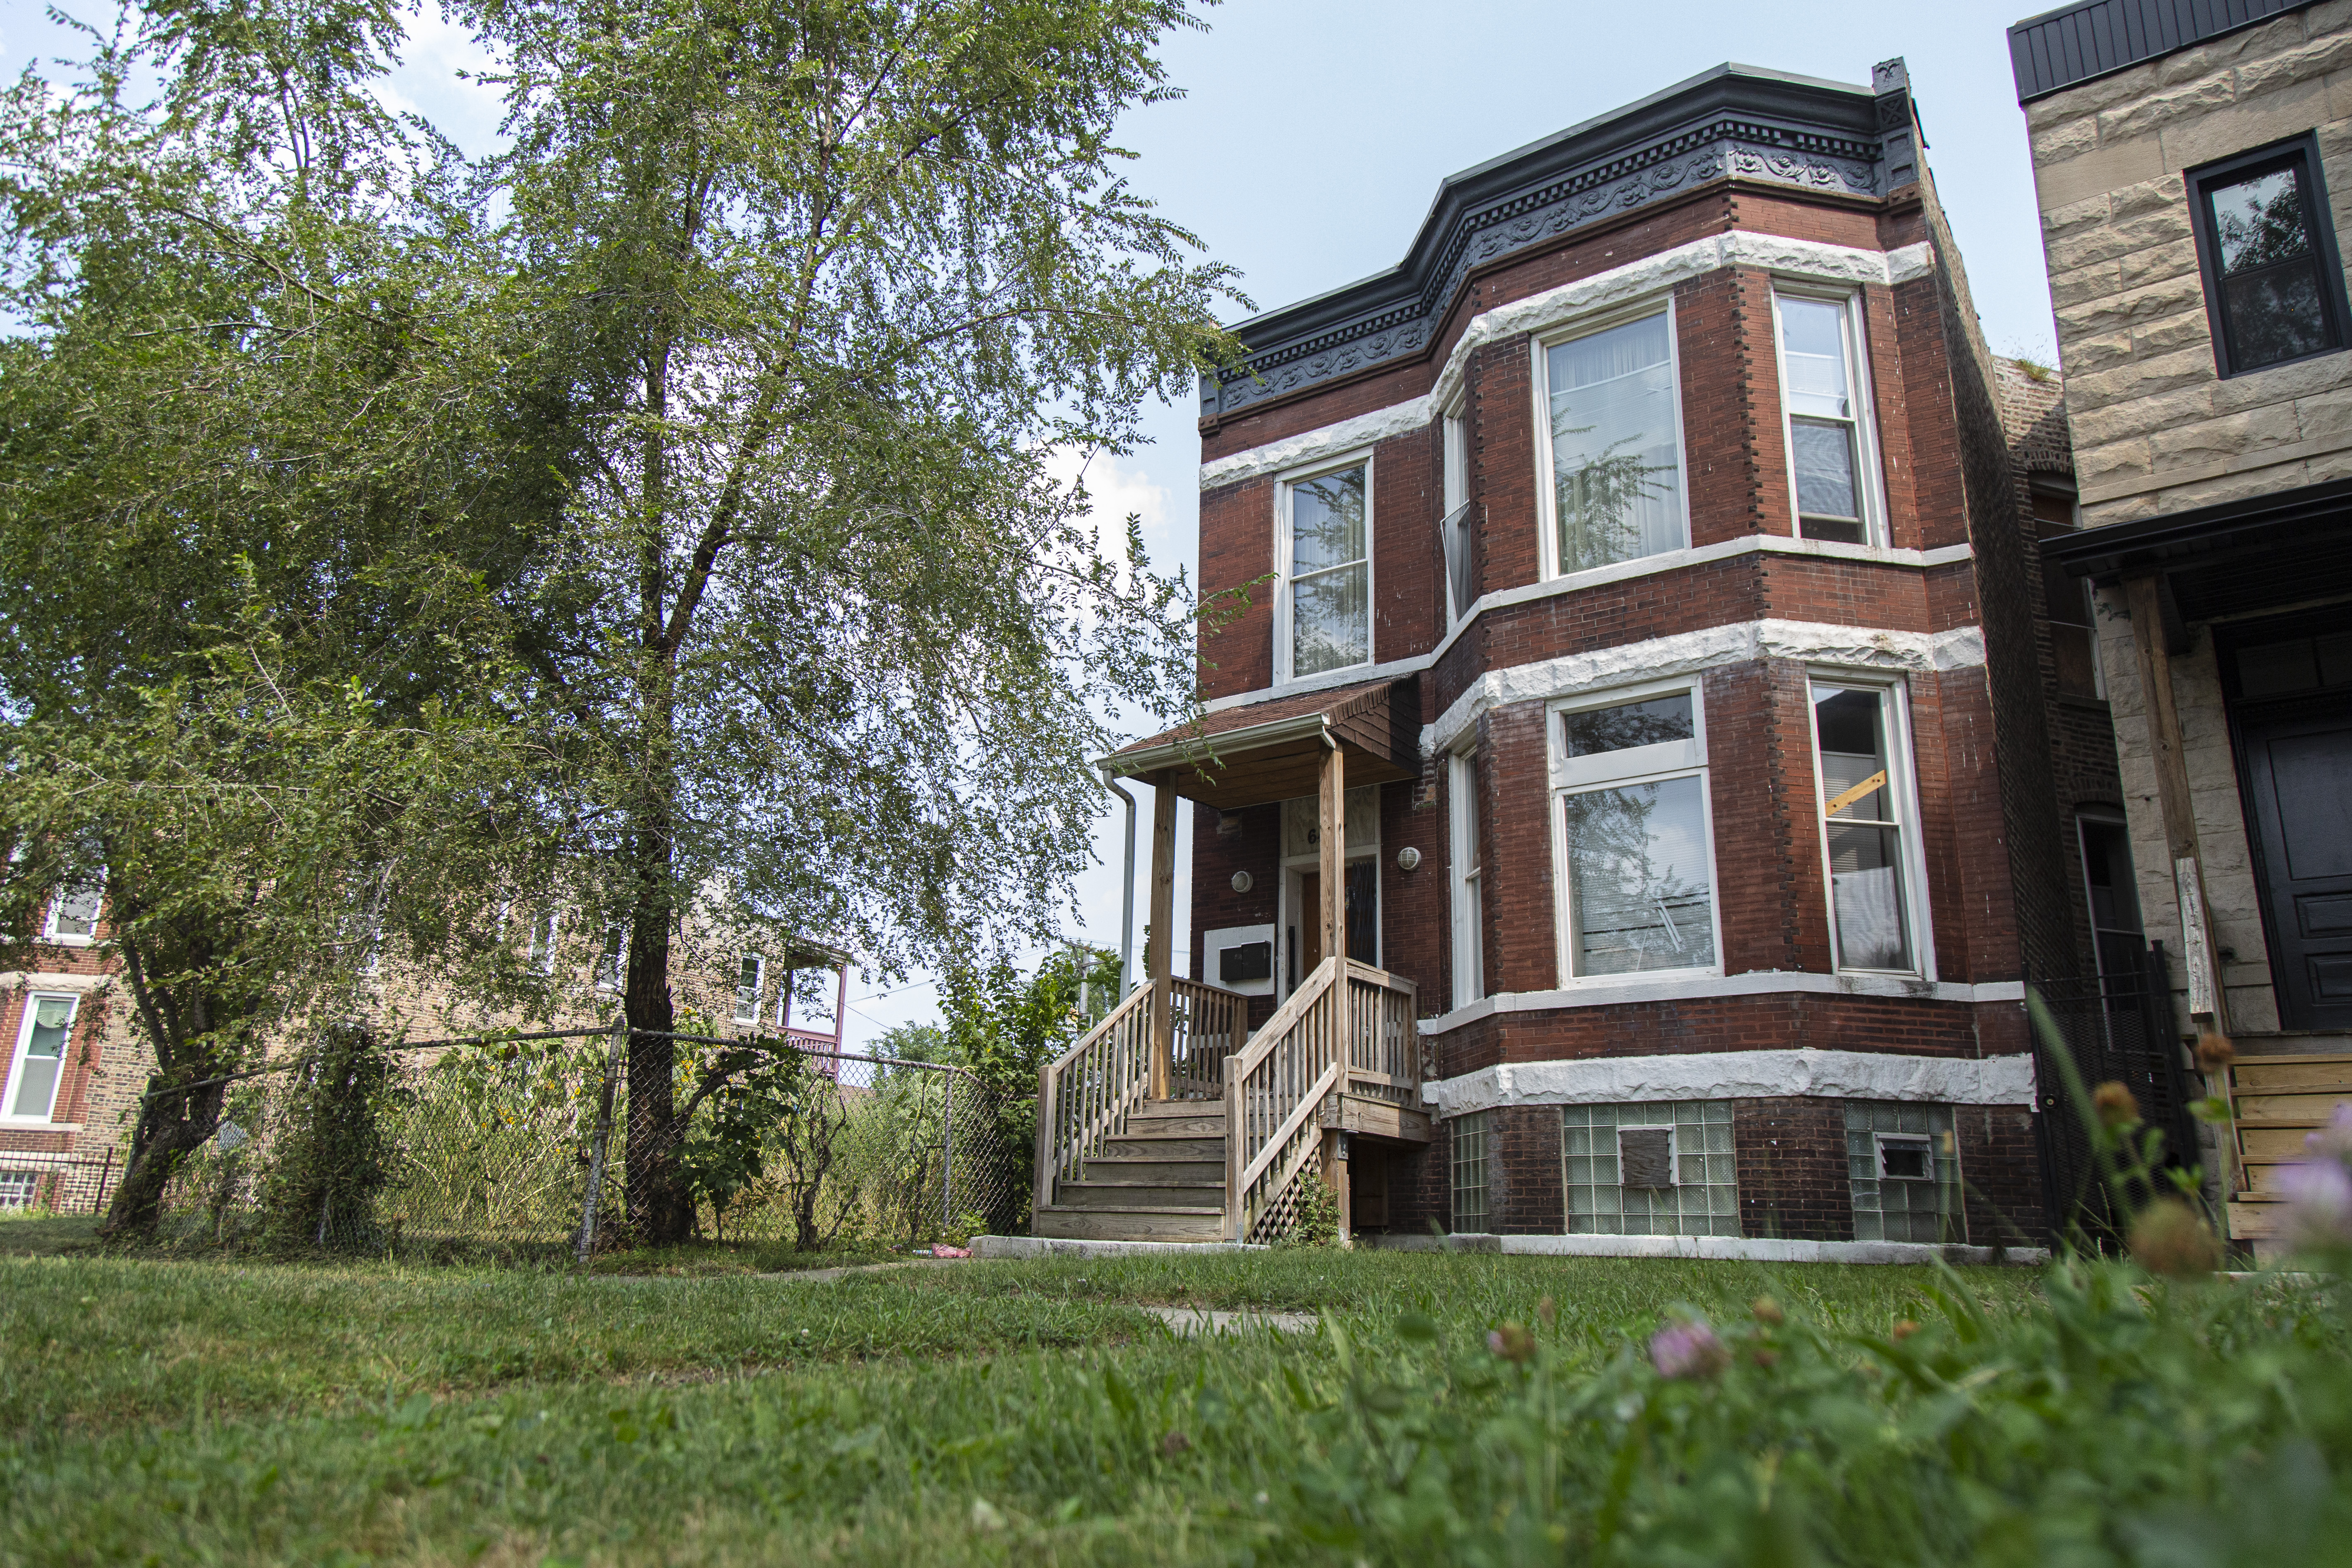 The Commission on Chicago Landmarks today granted preliminary landmark status to the South Side childhood home of Emmett Till, as sought by preservationists and the Till family. The home at 6427 S. St. Lawrence in Woodlawn is where the teen lived before the trip Down South that ended with his brutal lynching on Aug. 28, 1955.